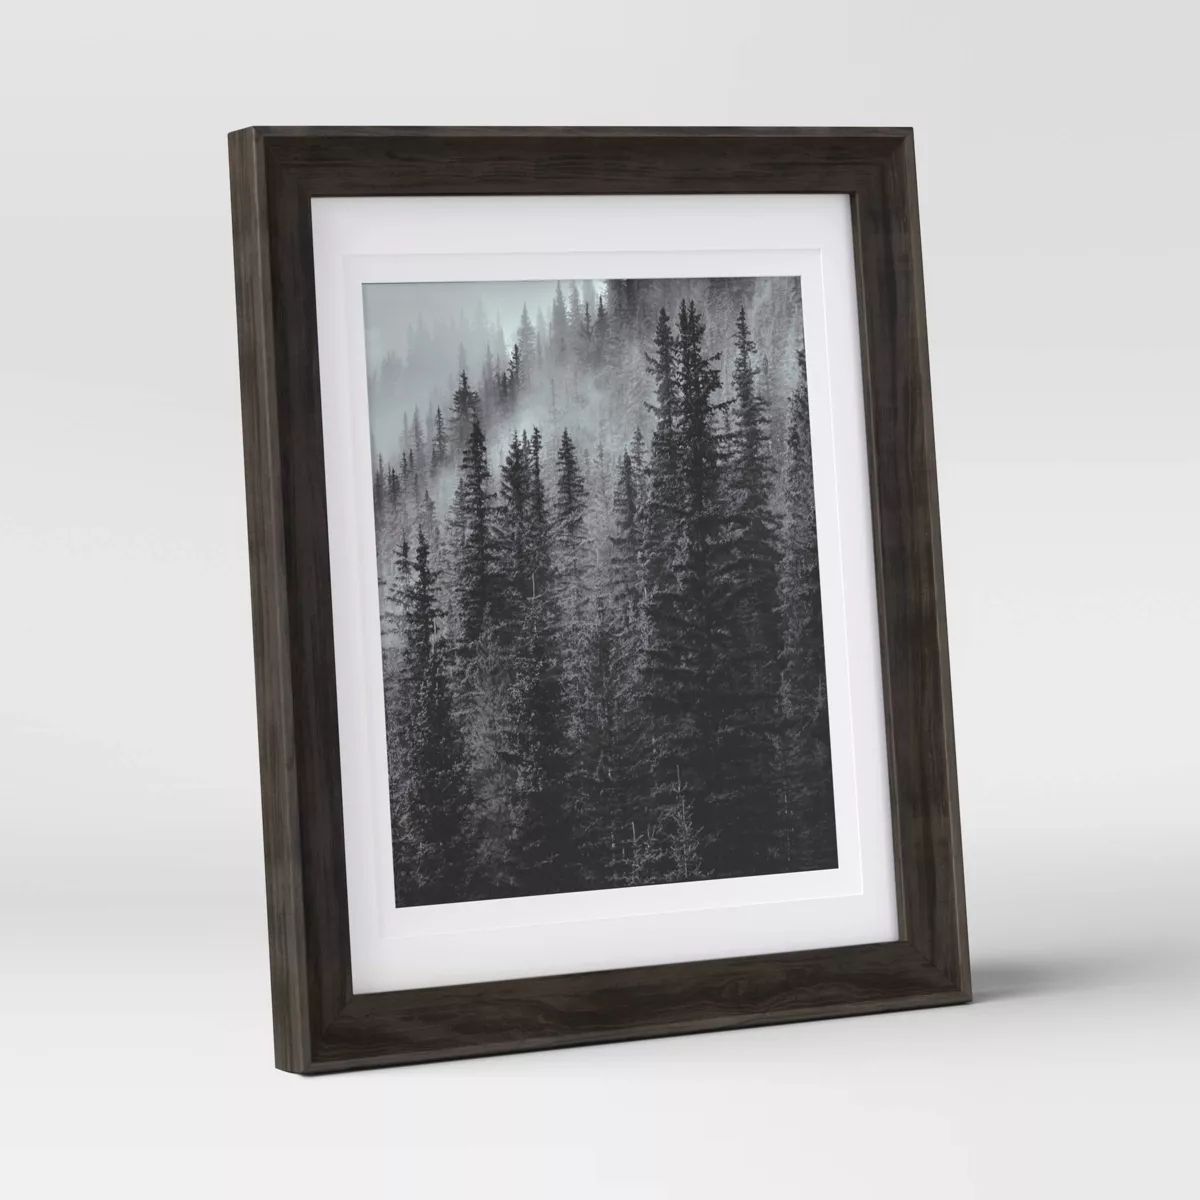 8" x 10" Double Matted Table Frame Dark Brown - Threshold™ | Target